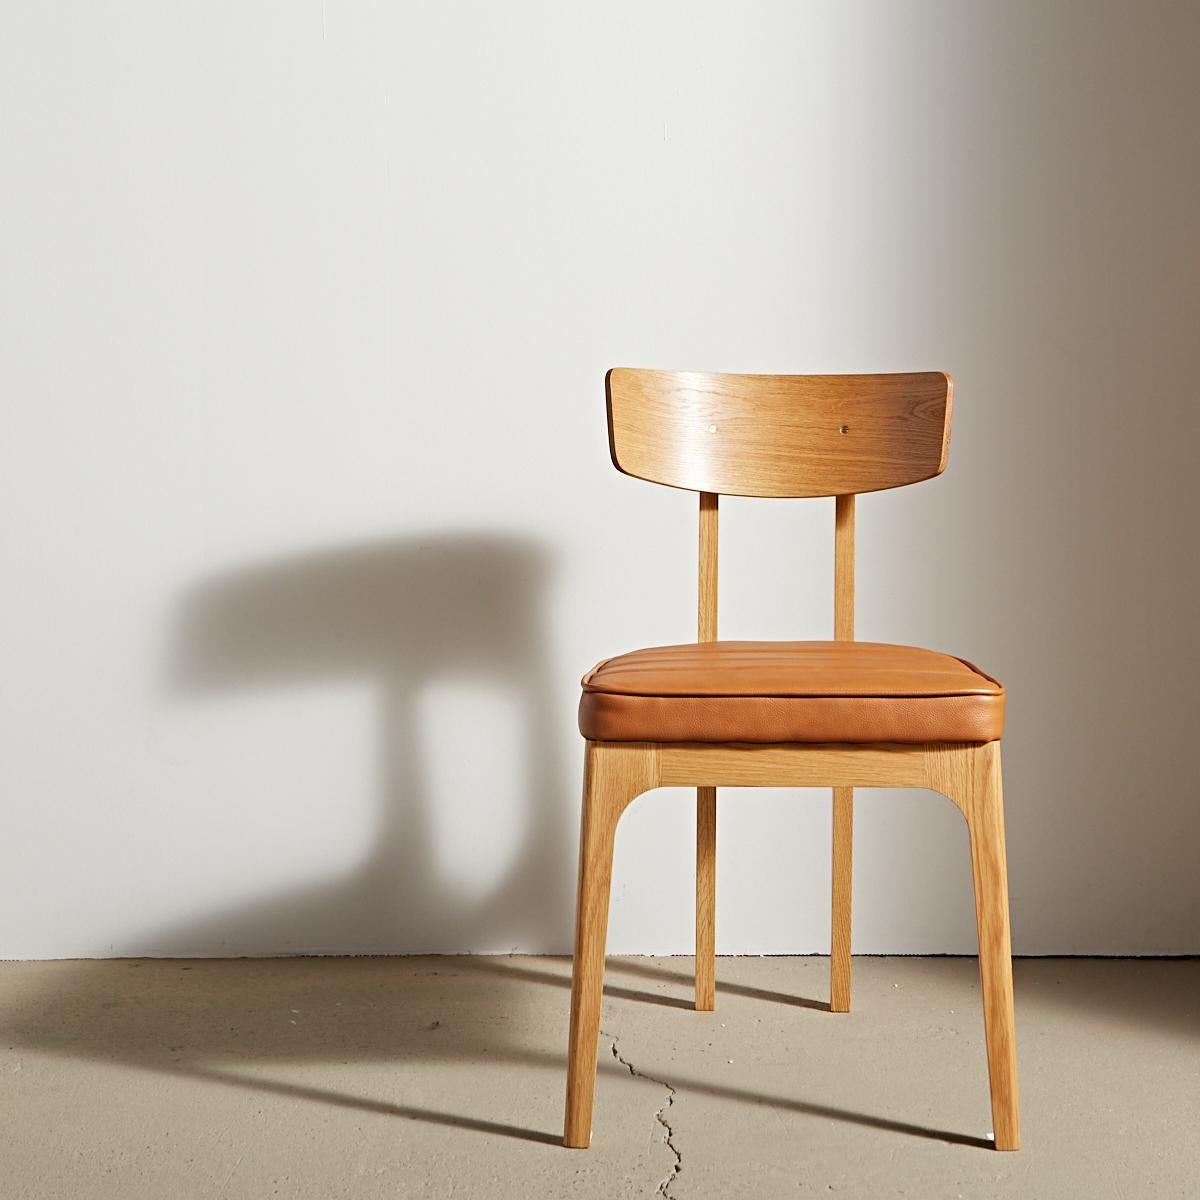 Unexpected angles provide an updated silhouette for a classic hardwood dining chair. Inspired by the European glamour of a Cafe Racer motorcycle, it has a strength and stability that defies the elegance of its slim legs. Featuring a bent solid